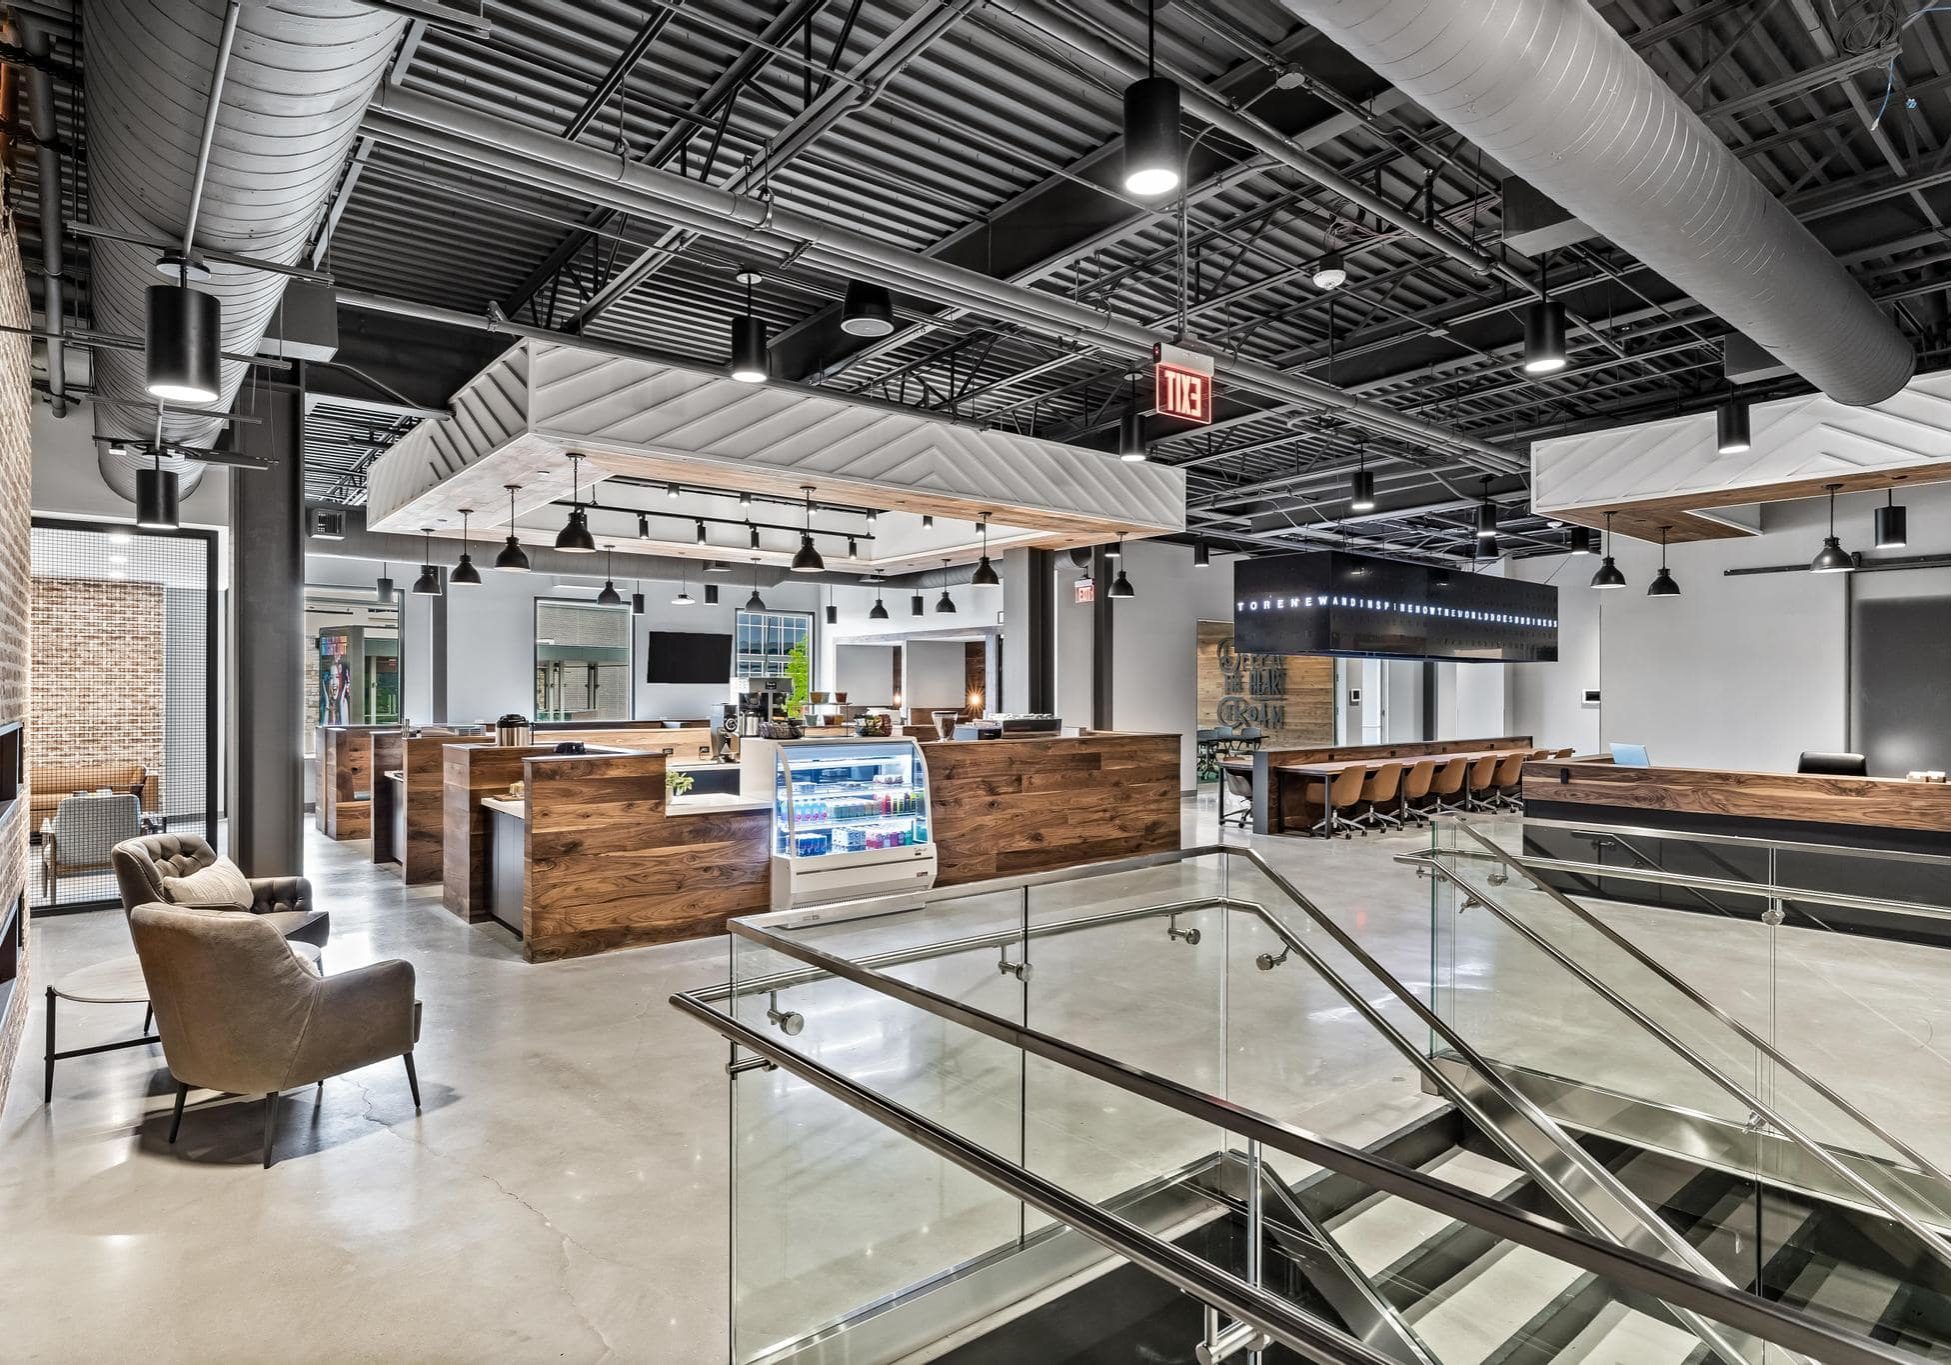 Shared workspace at Roam at Grandscape in The Colony, Texas